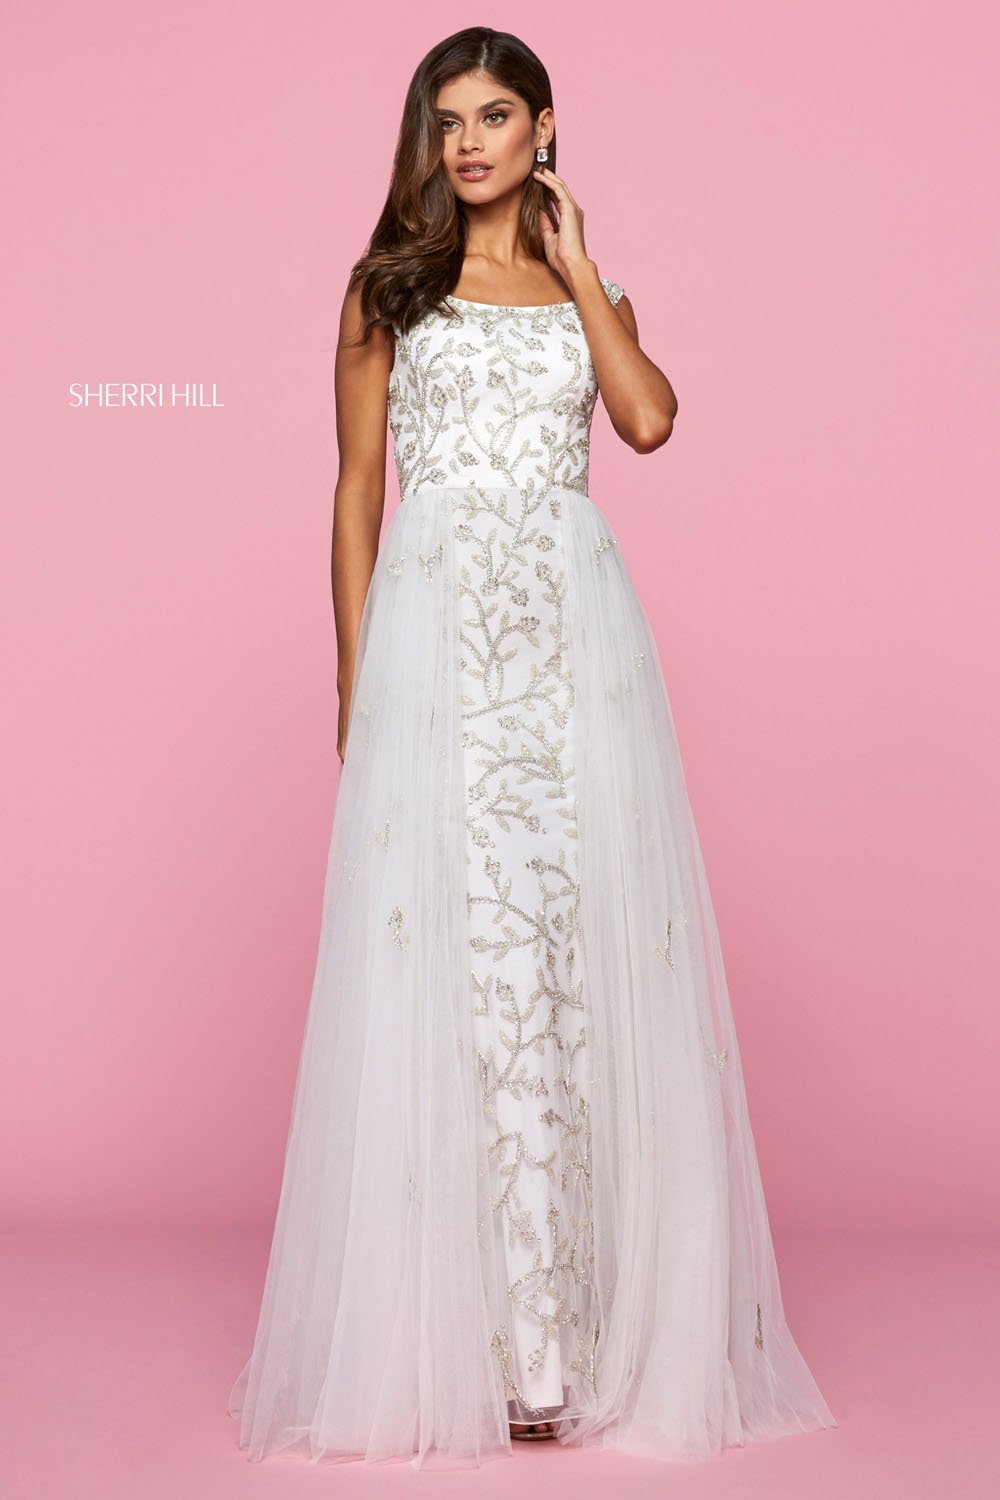 Sherri Hill 53542 dress images in these colors: Ivory, Blush.